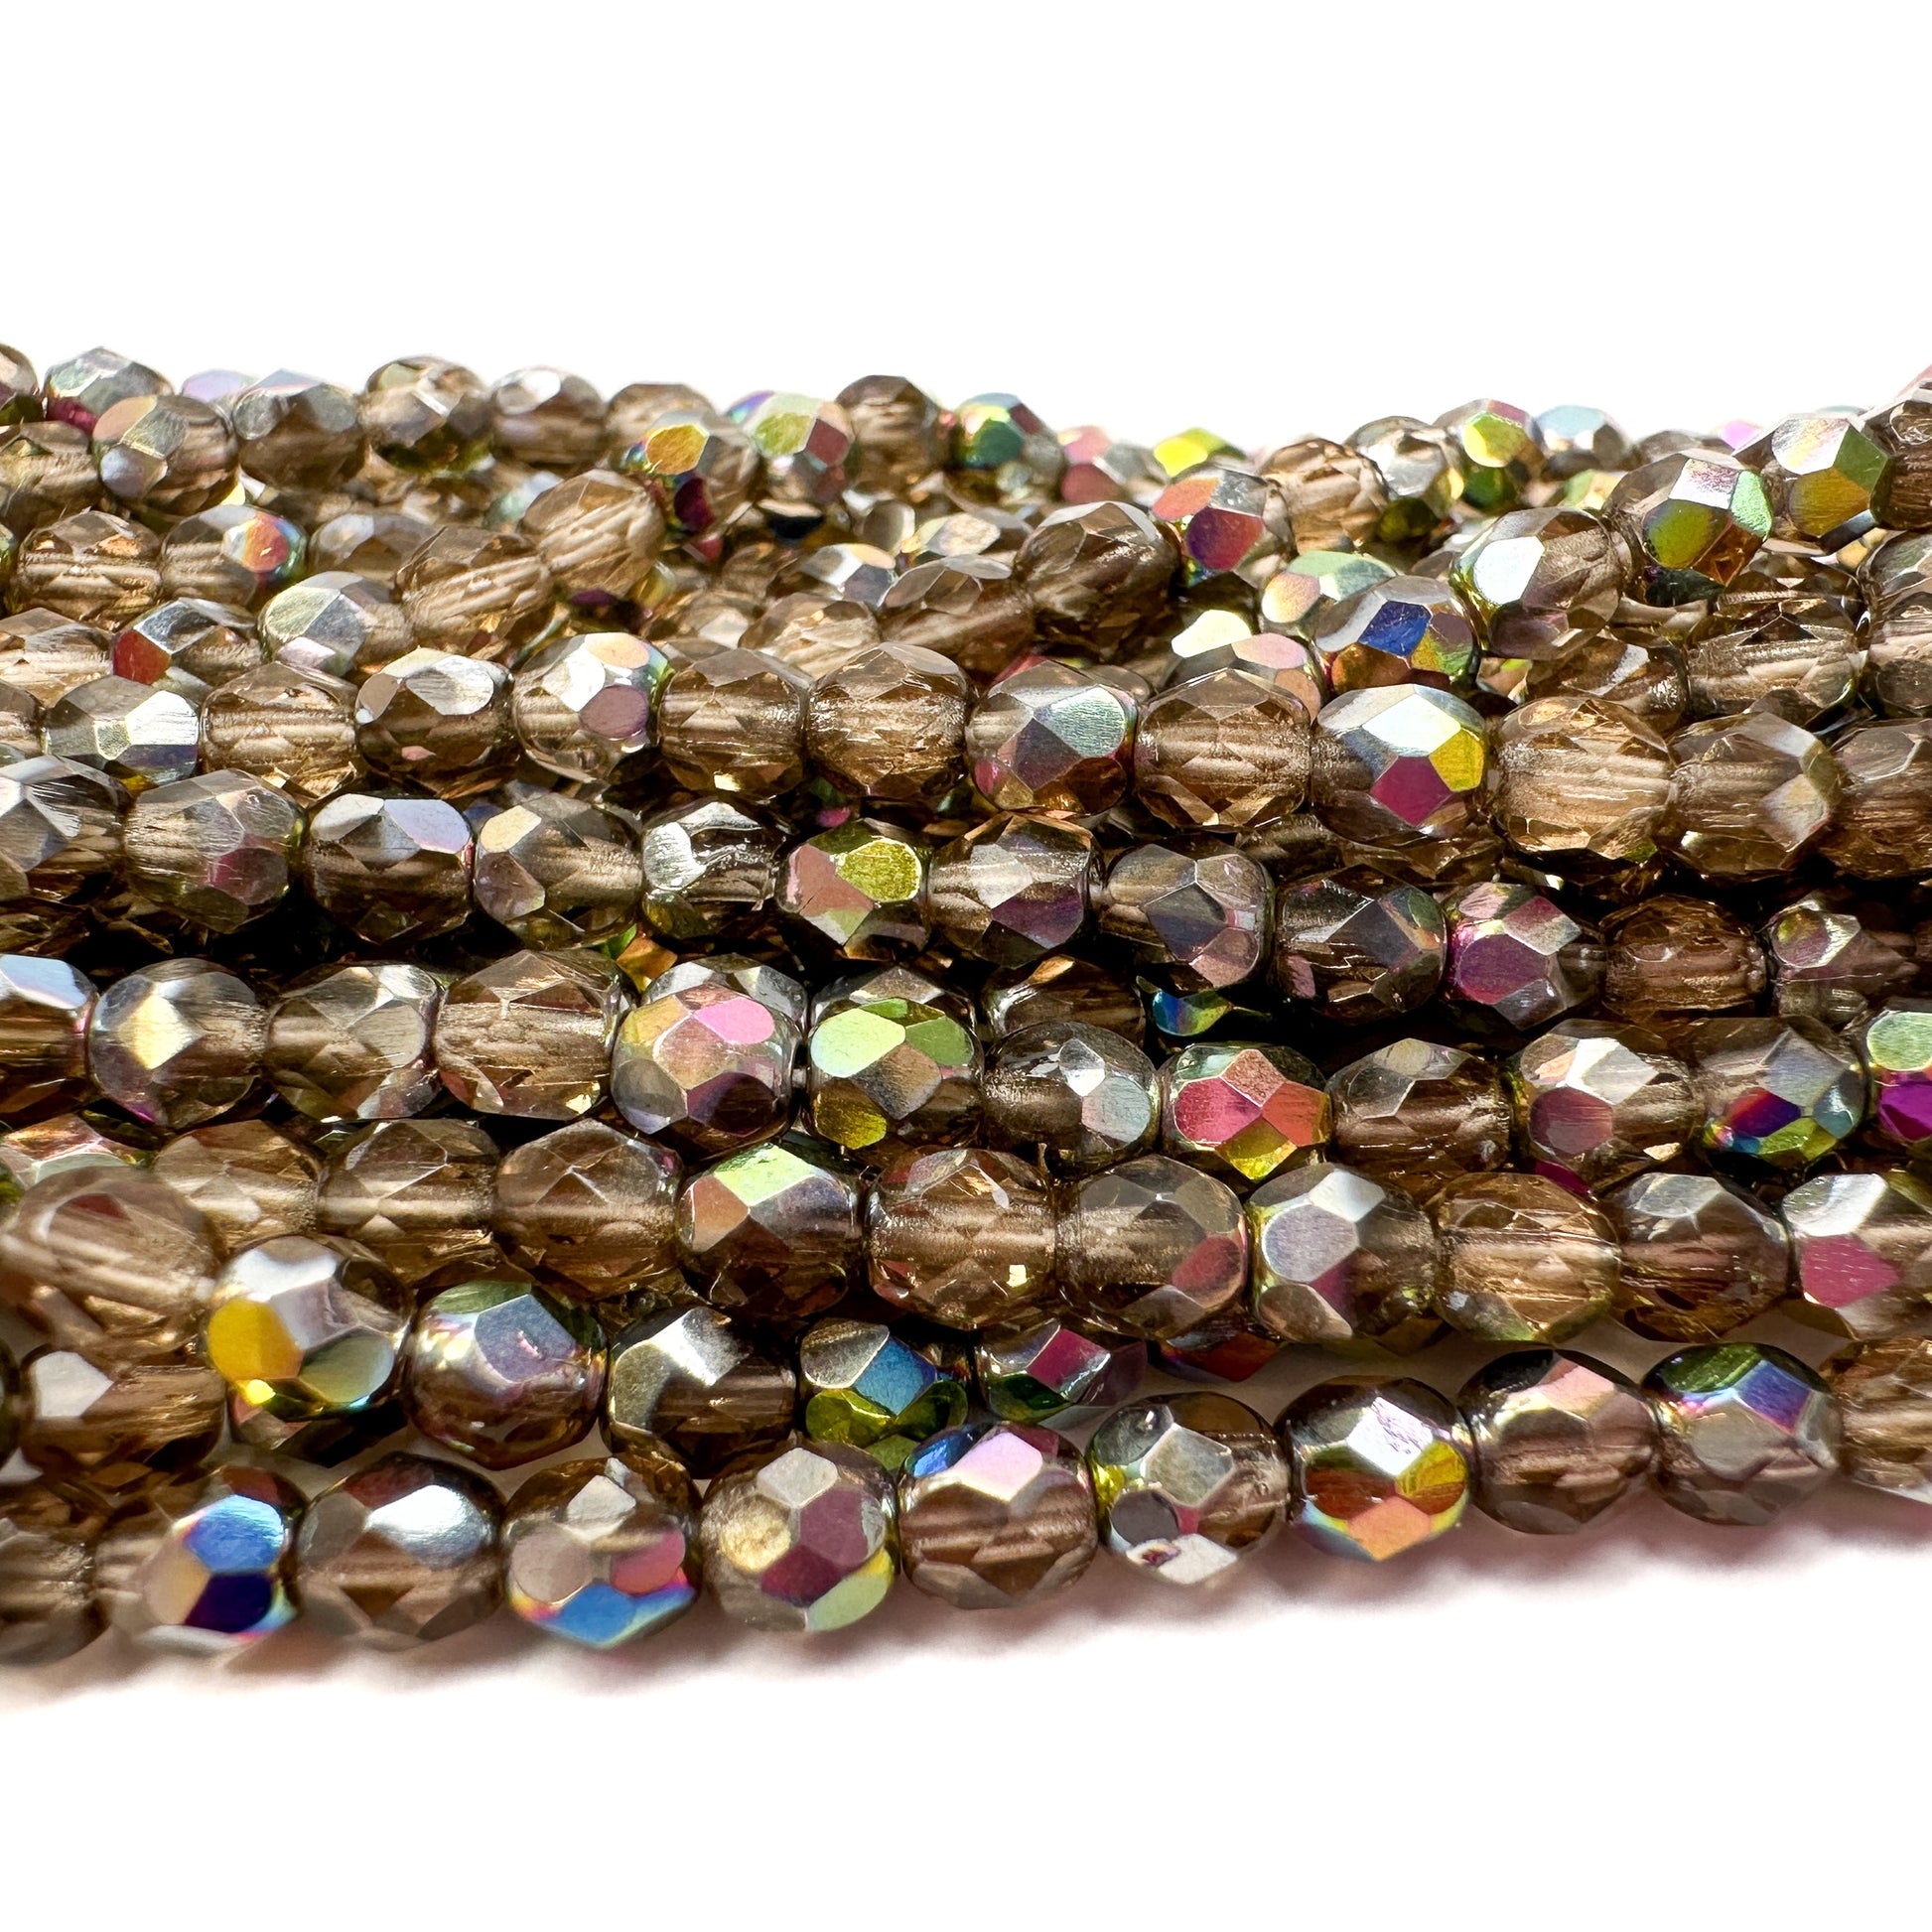 Topaz Vitrail 4mm Faceted Glass Bead - 50 pcs.-The Bead Gallery Honolulu